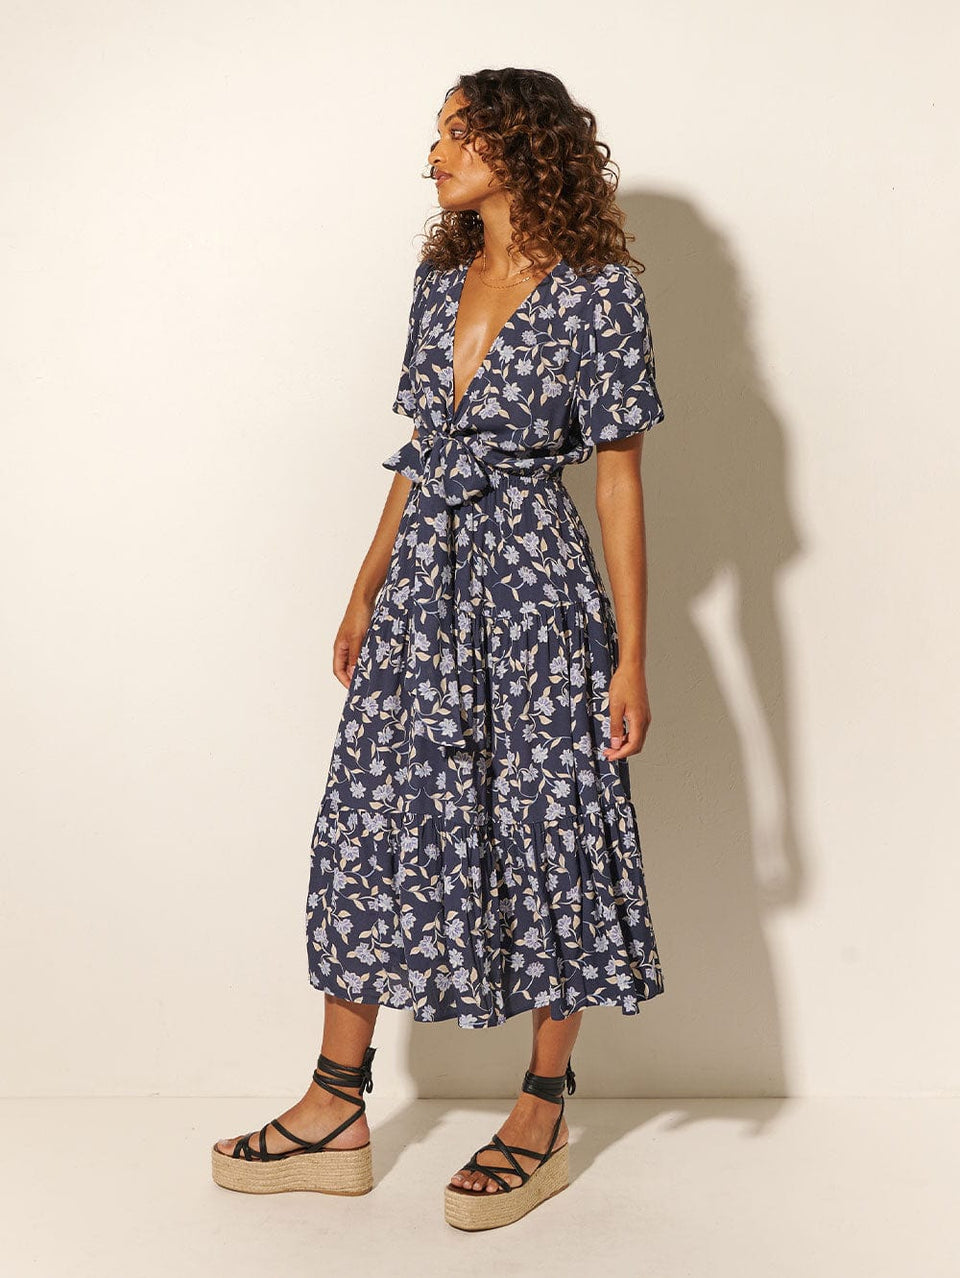 Studio model wears KIVARI Jeanne Tie Front Midi Dress: A navy and sky blue floral dress made from sustainable LENZING Viscose Crepe and featuring a tie front, elasticated waist, short puff sleeves and tiered skirt.